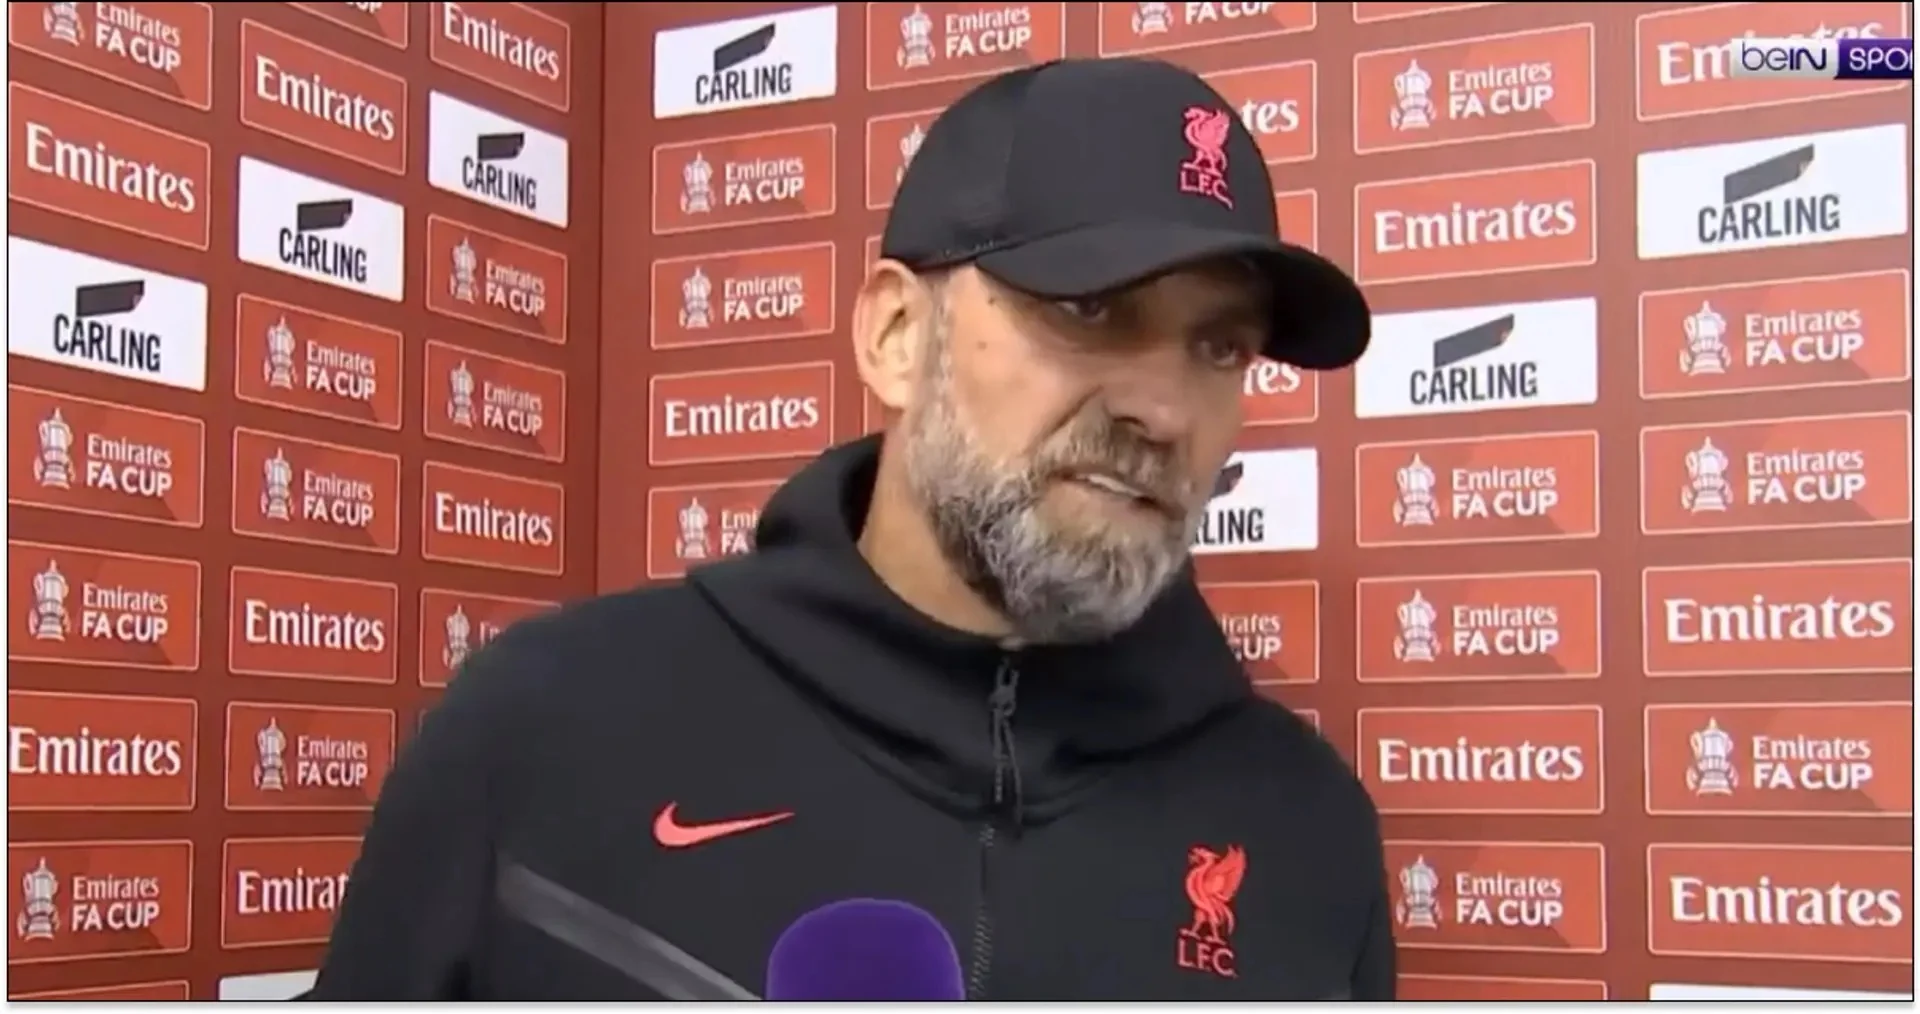 liverpool manager confirms no more signings for Liverpool this January even after Brighton's defeat